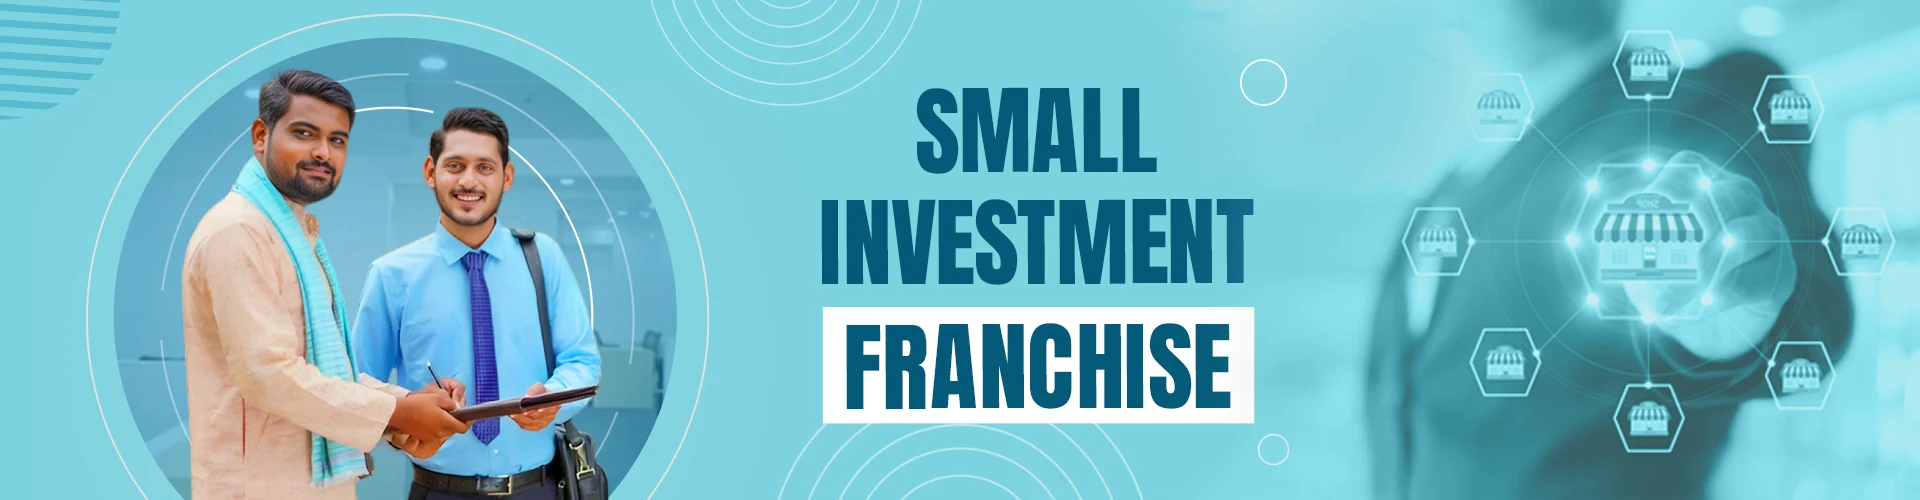 Small Investment Franchise Business